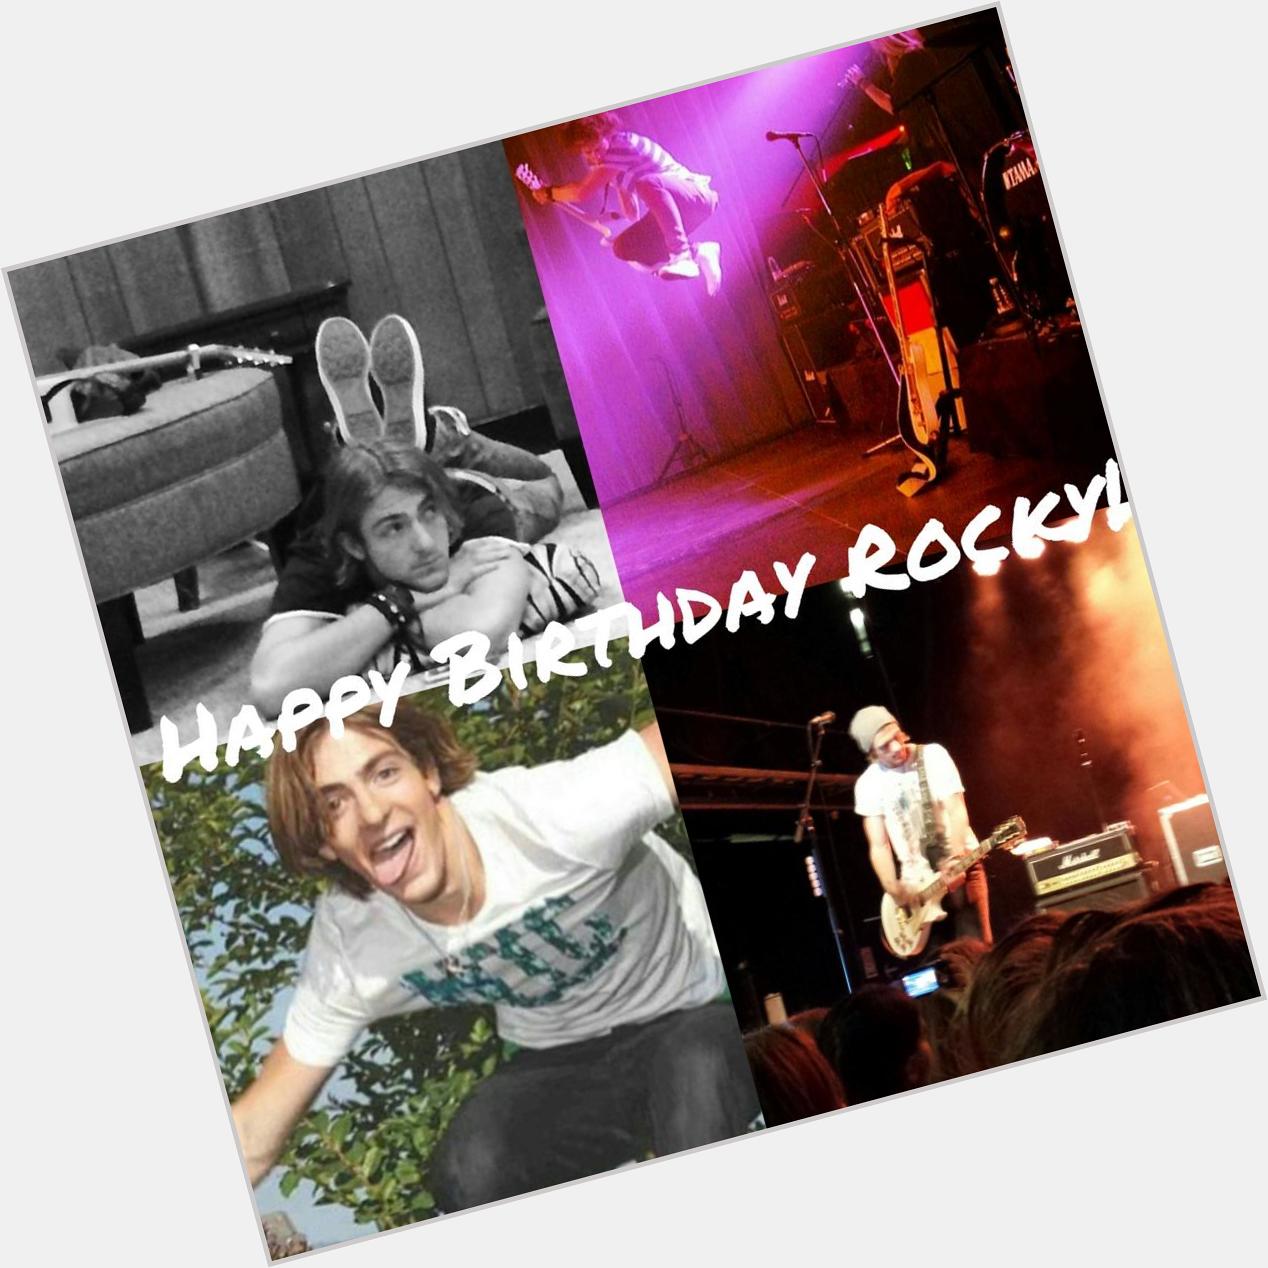 HAPPY BIRTHDAY ROCKY LYNCH!! I CANT BELIEVE YOURE NOT A TEENAGER ANYMORE!!!     